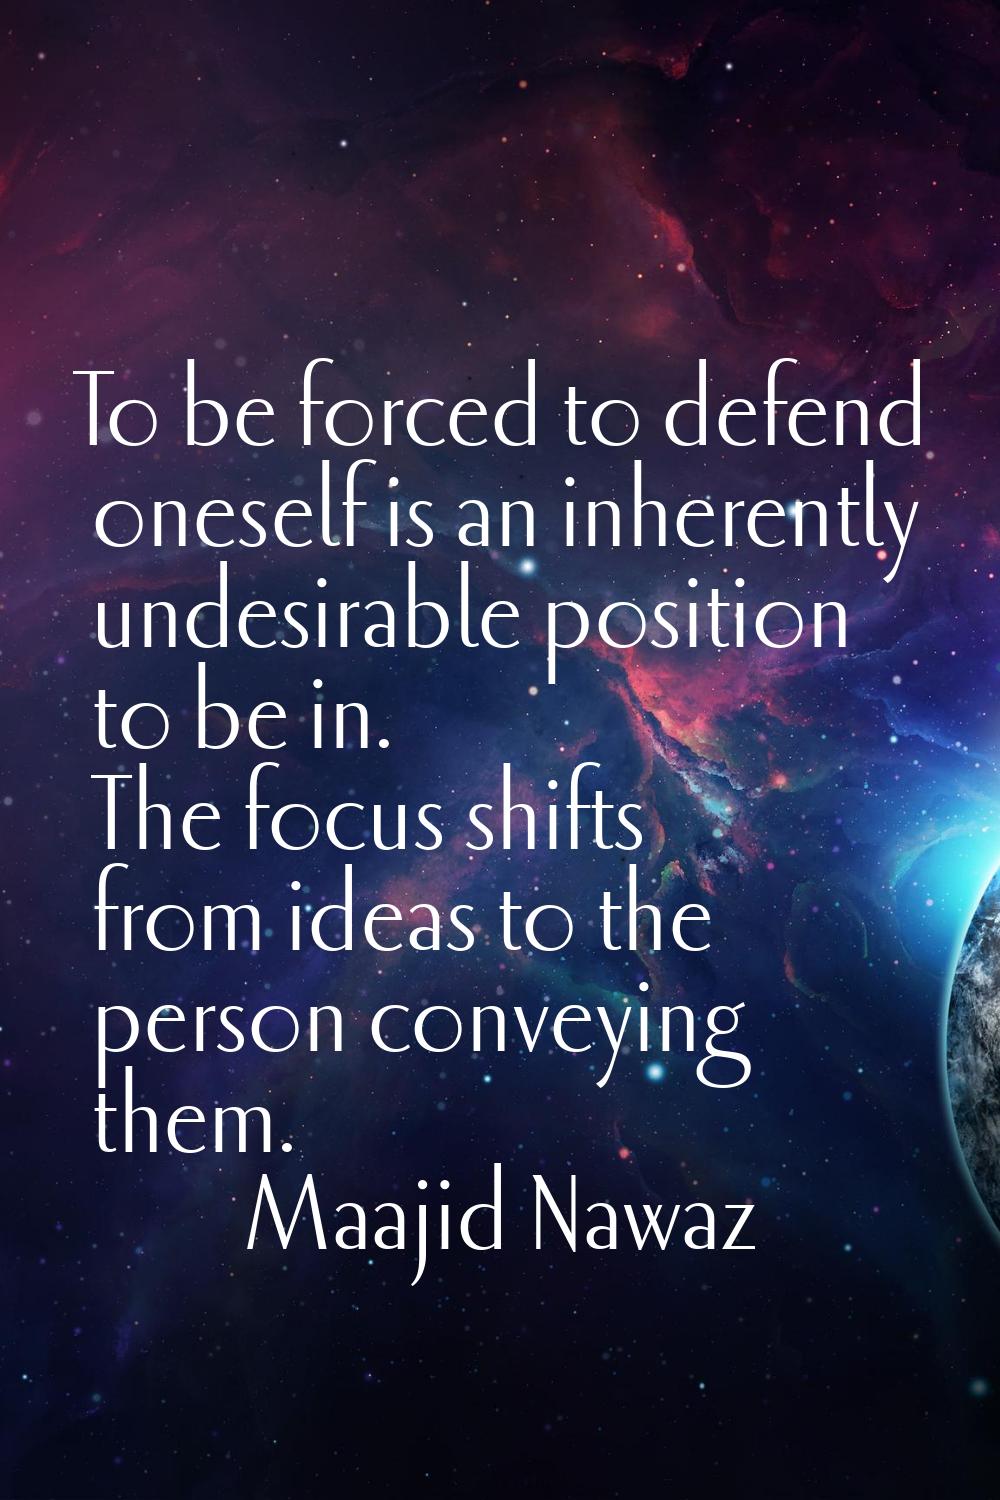 To be forced to defend oneself is an inherently undesirable position to be in. The focus shifts fro